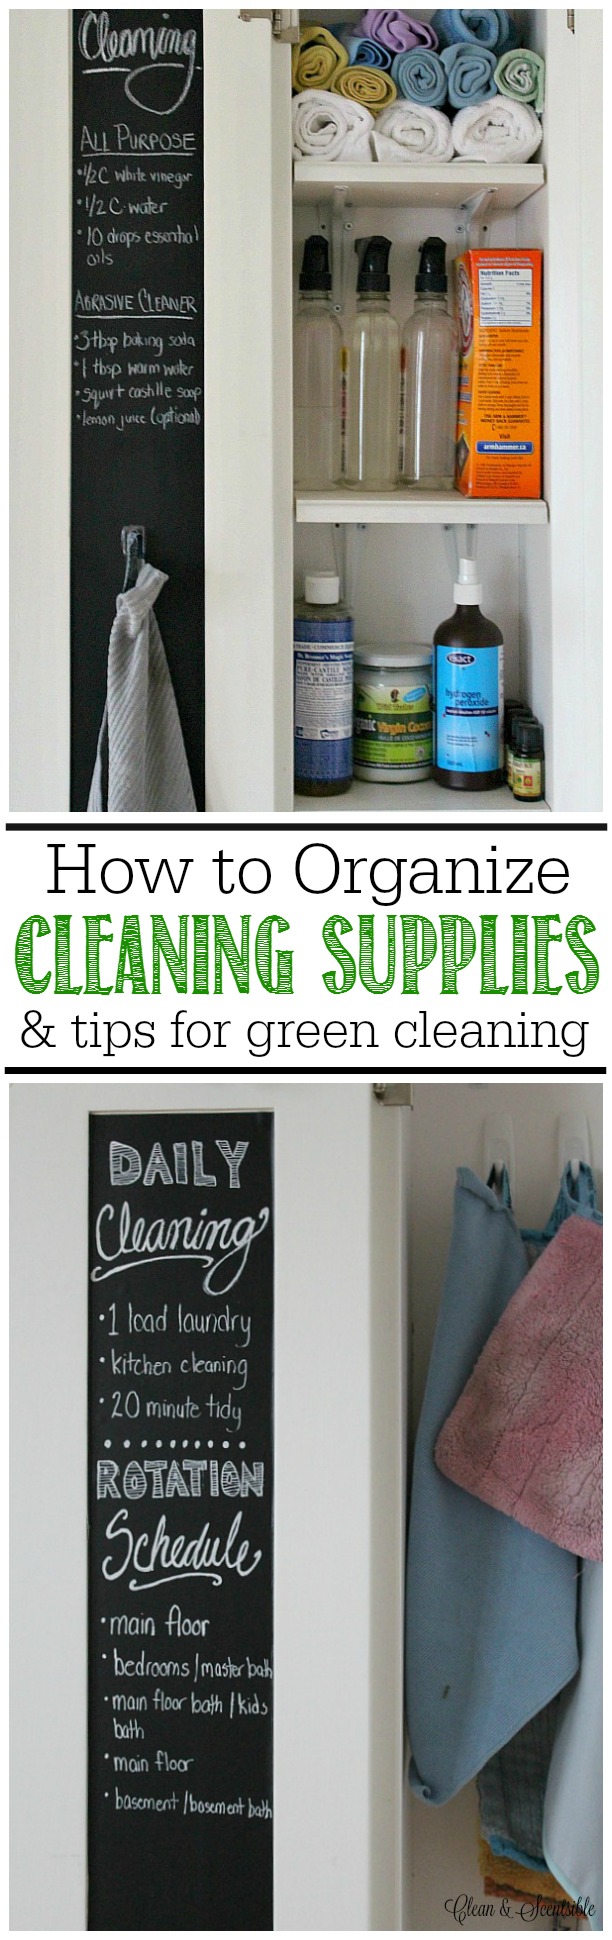 Great post on how to organize cleaning supplies and basic green cleaning tips.